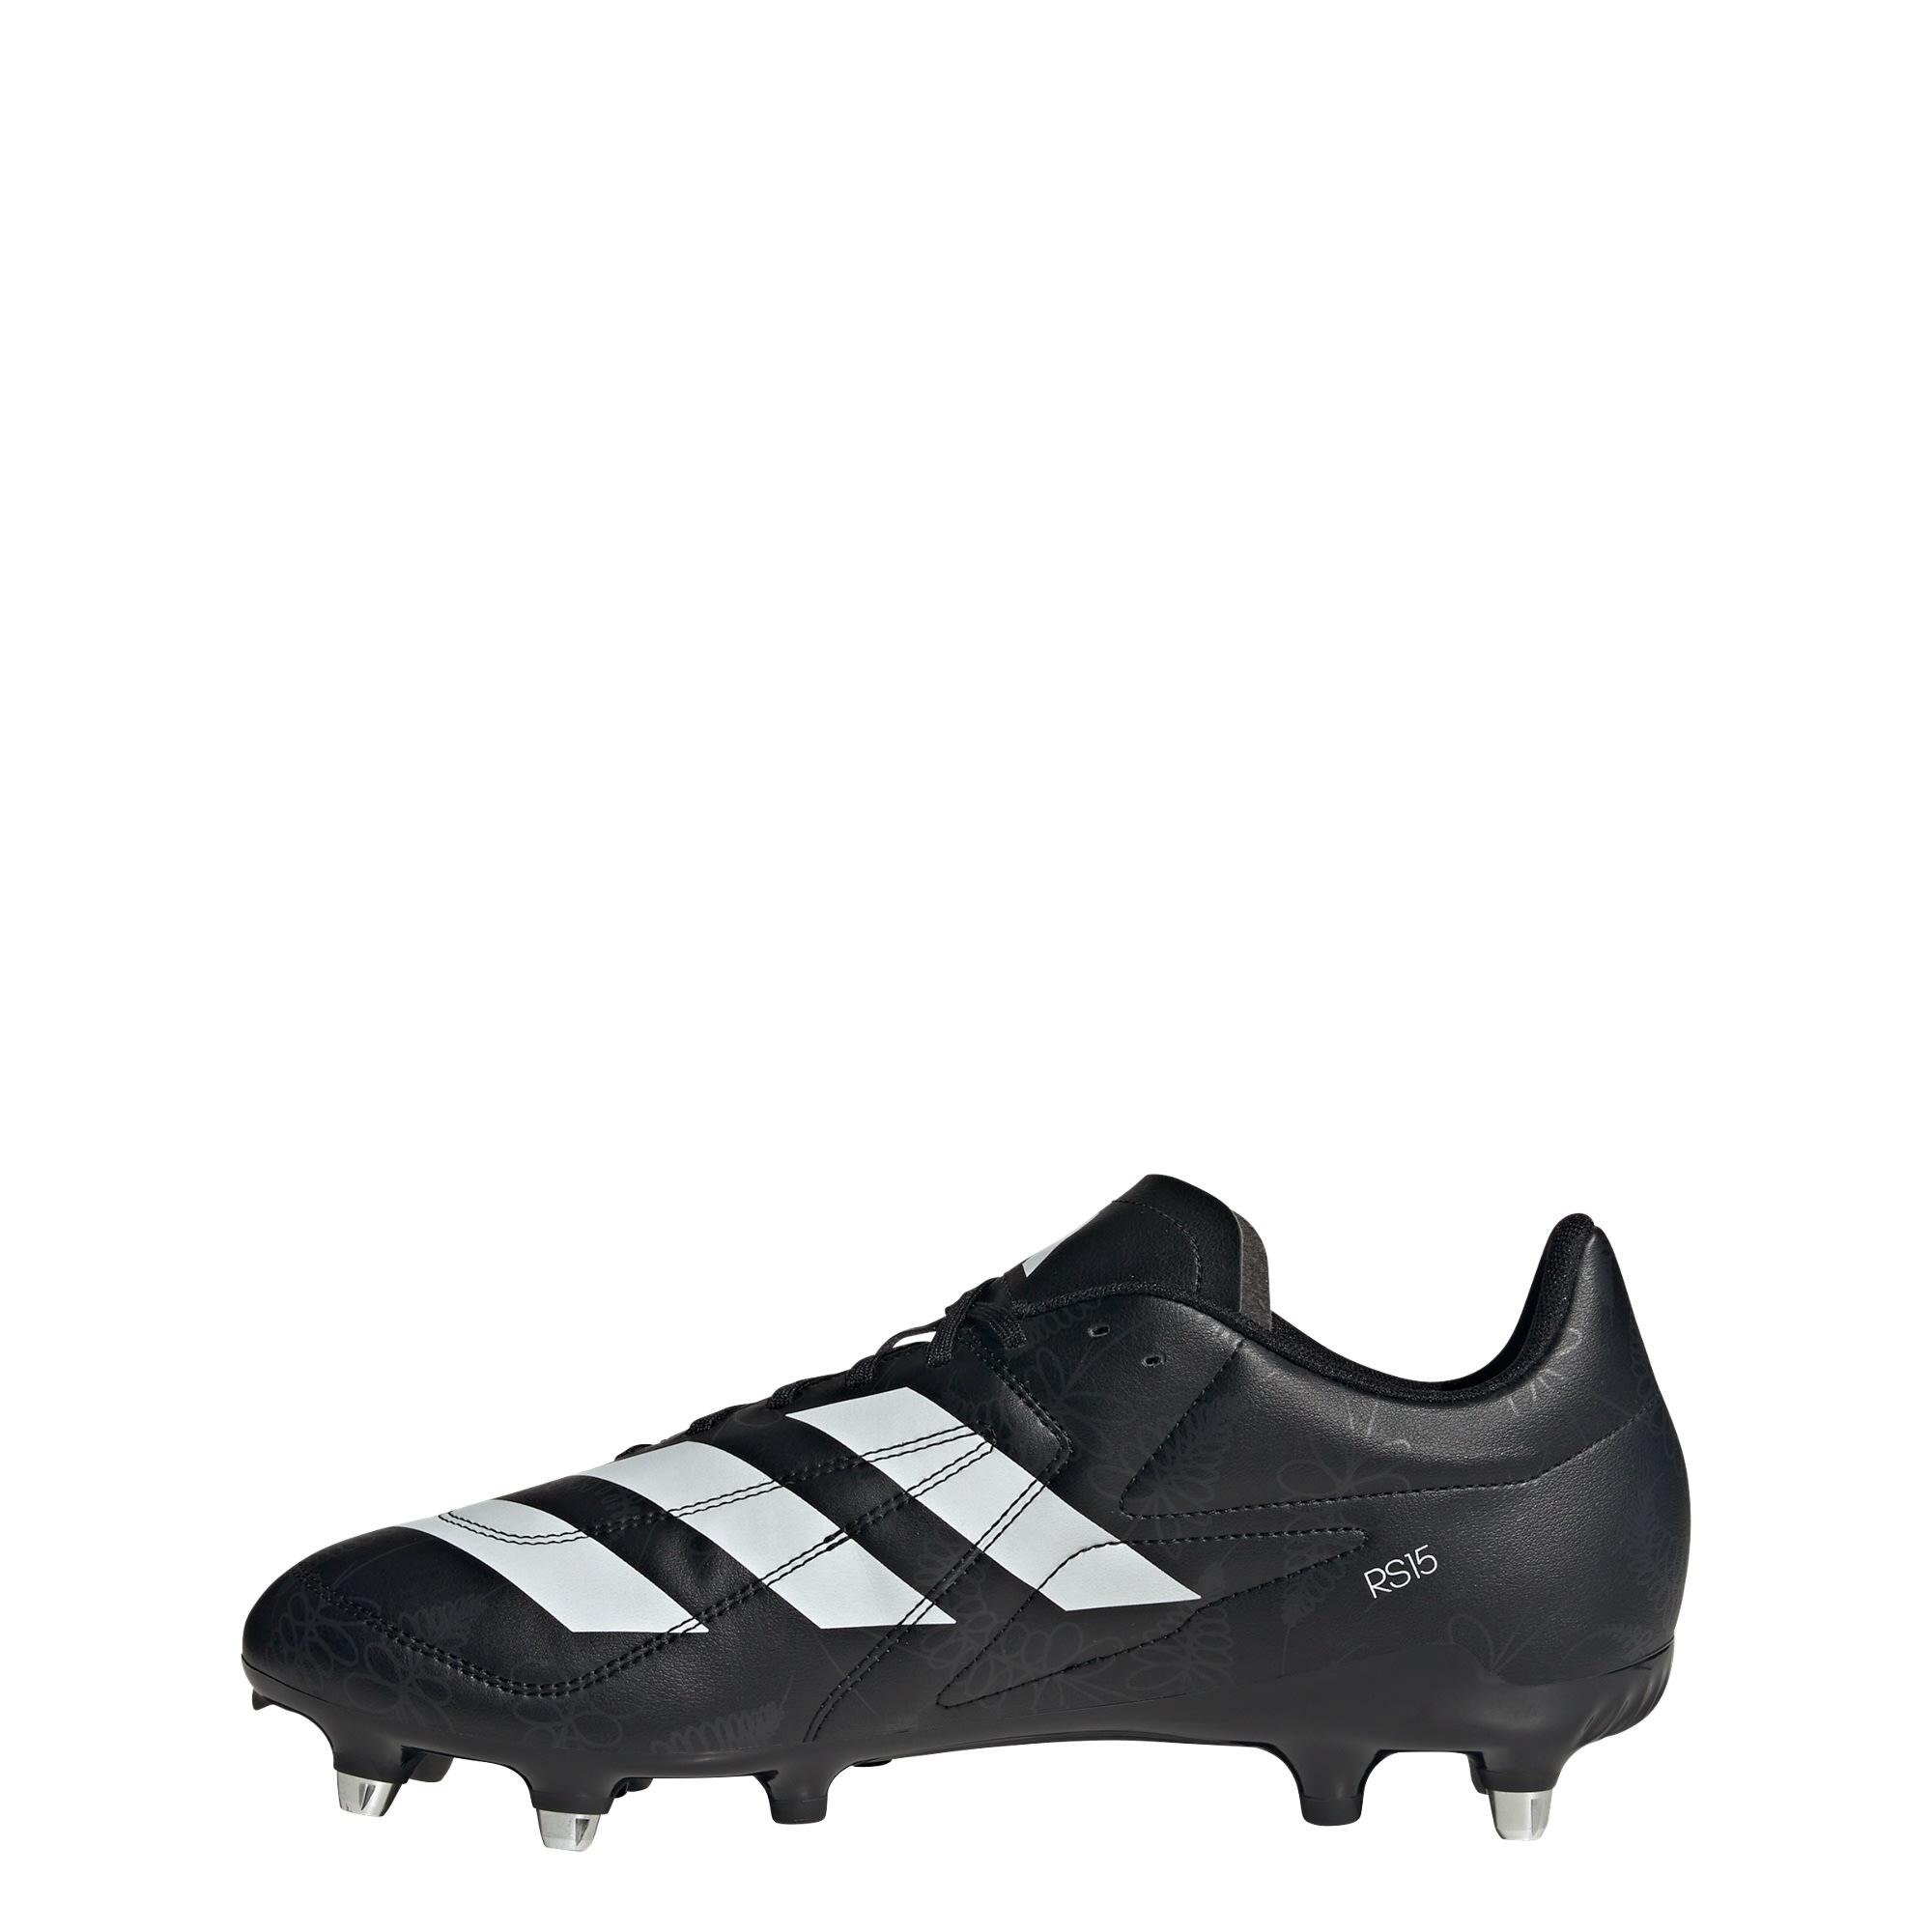 ADIDAS RS15 Soft Ground Rugby Boots